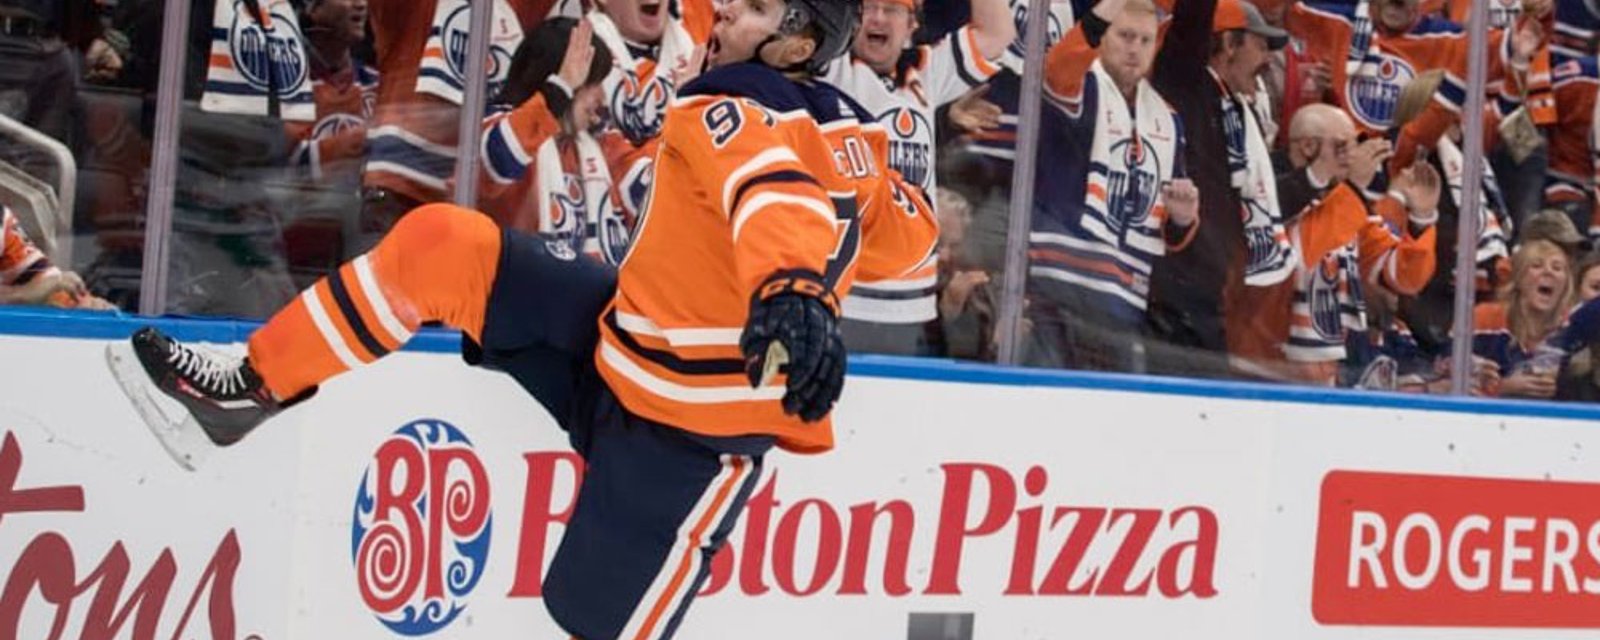 McDavid dazzles with a highlight reel goal to put the Oilers up late in the third period